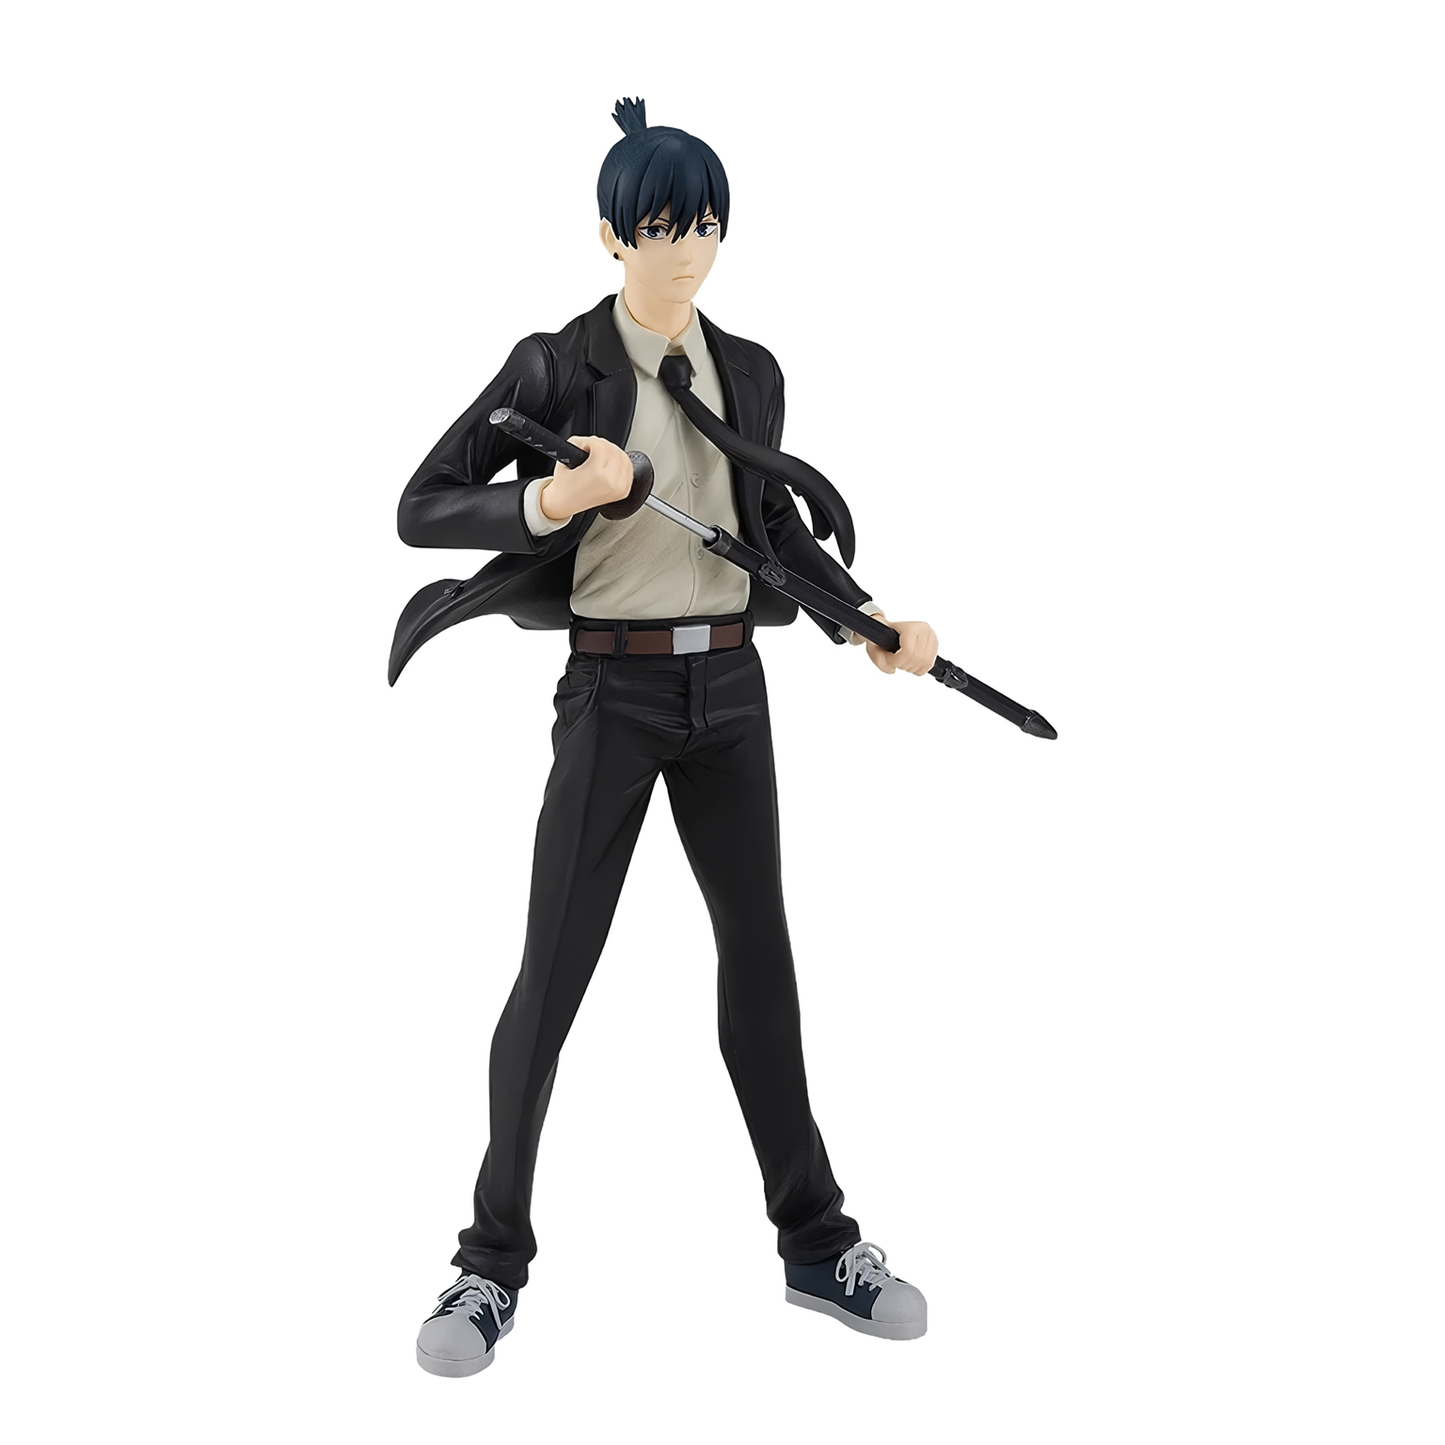 <div><br></div> <div> <p data-mce-fragment="1">Unleash your inner adventurer with Aki Hayakawa - Chainsaw Man figurine.</p> <p data-mce-fragment="1">This figurine captures the fierce and determined spirit of Aki Hayakawa.&nbsp;</p> <p data-mce-fragment="1">Add it to your collection and feel the excitement of the Chainsaw Man cast in your own home!</p> </div>